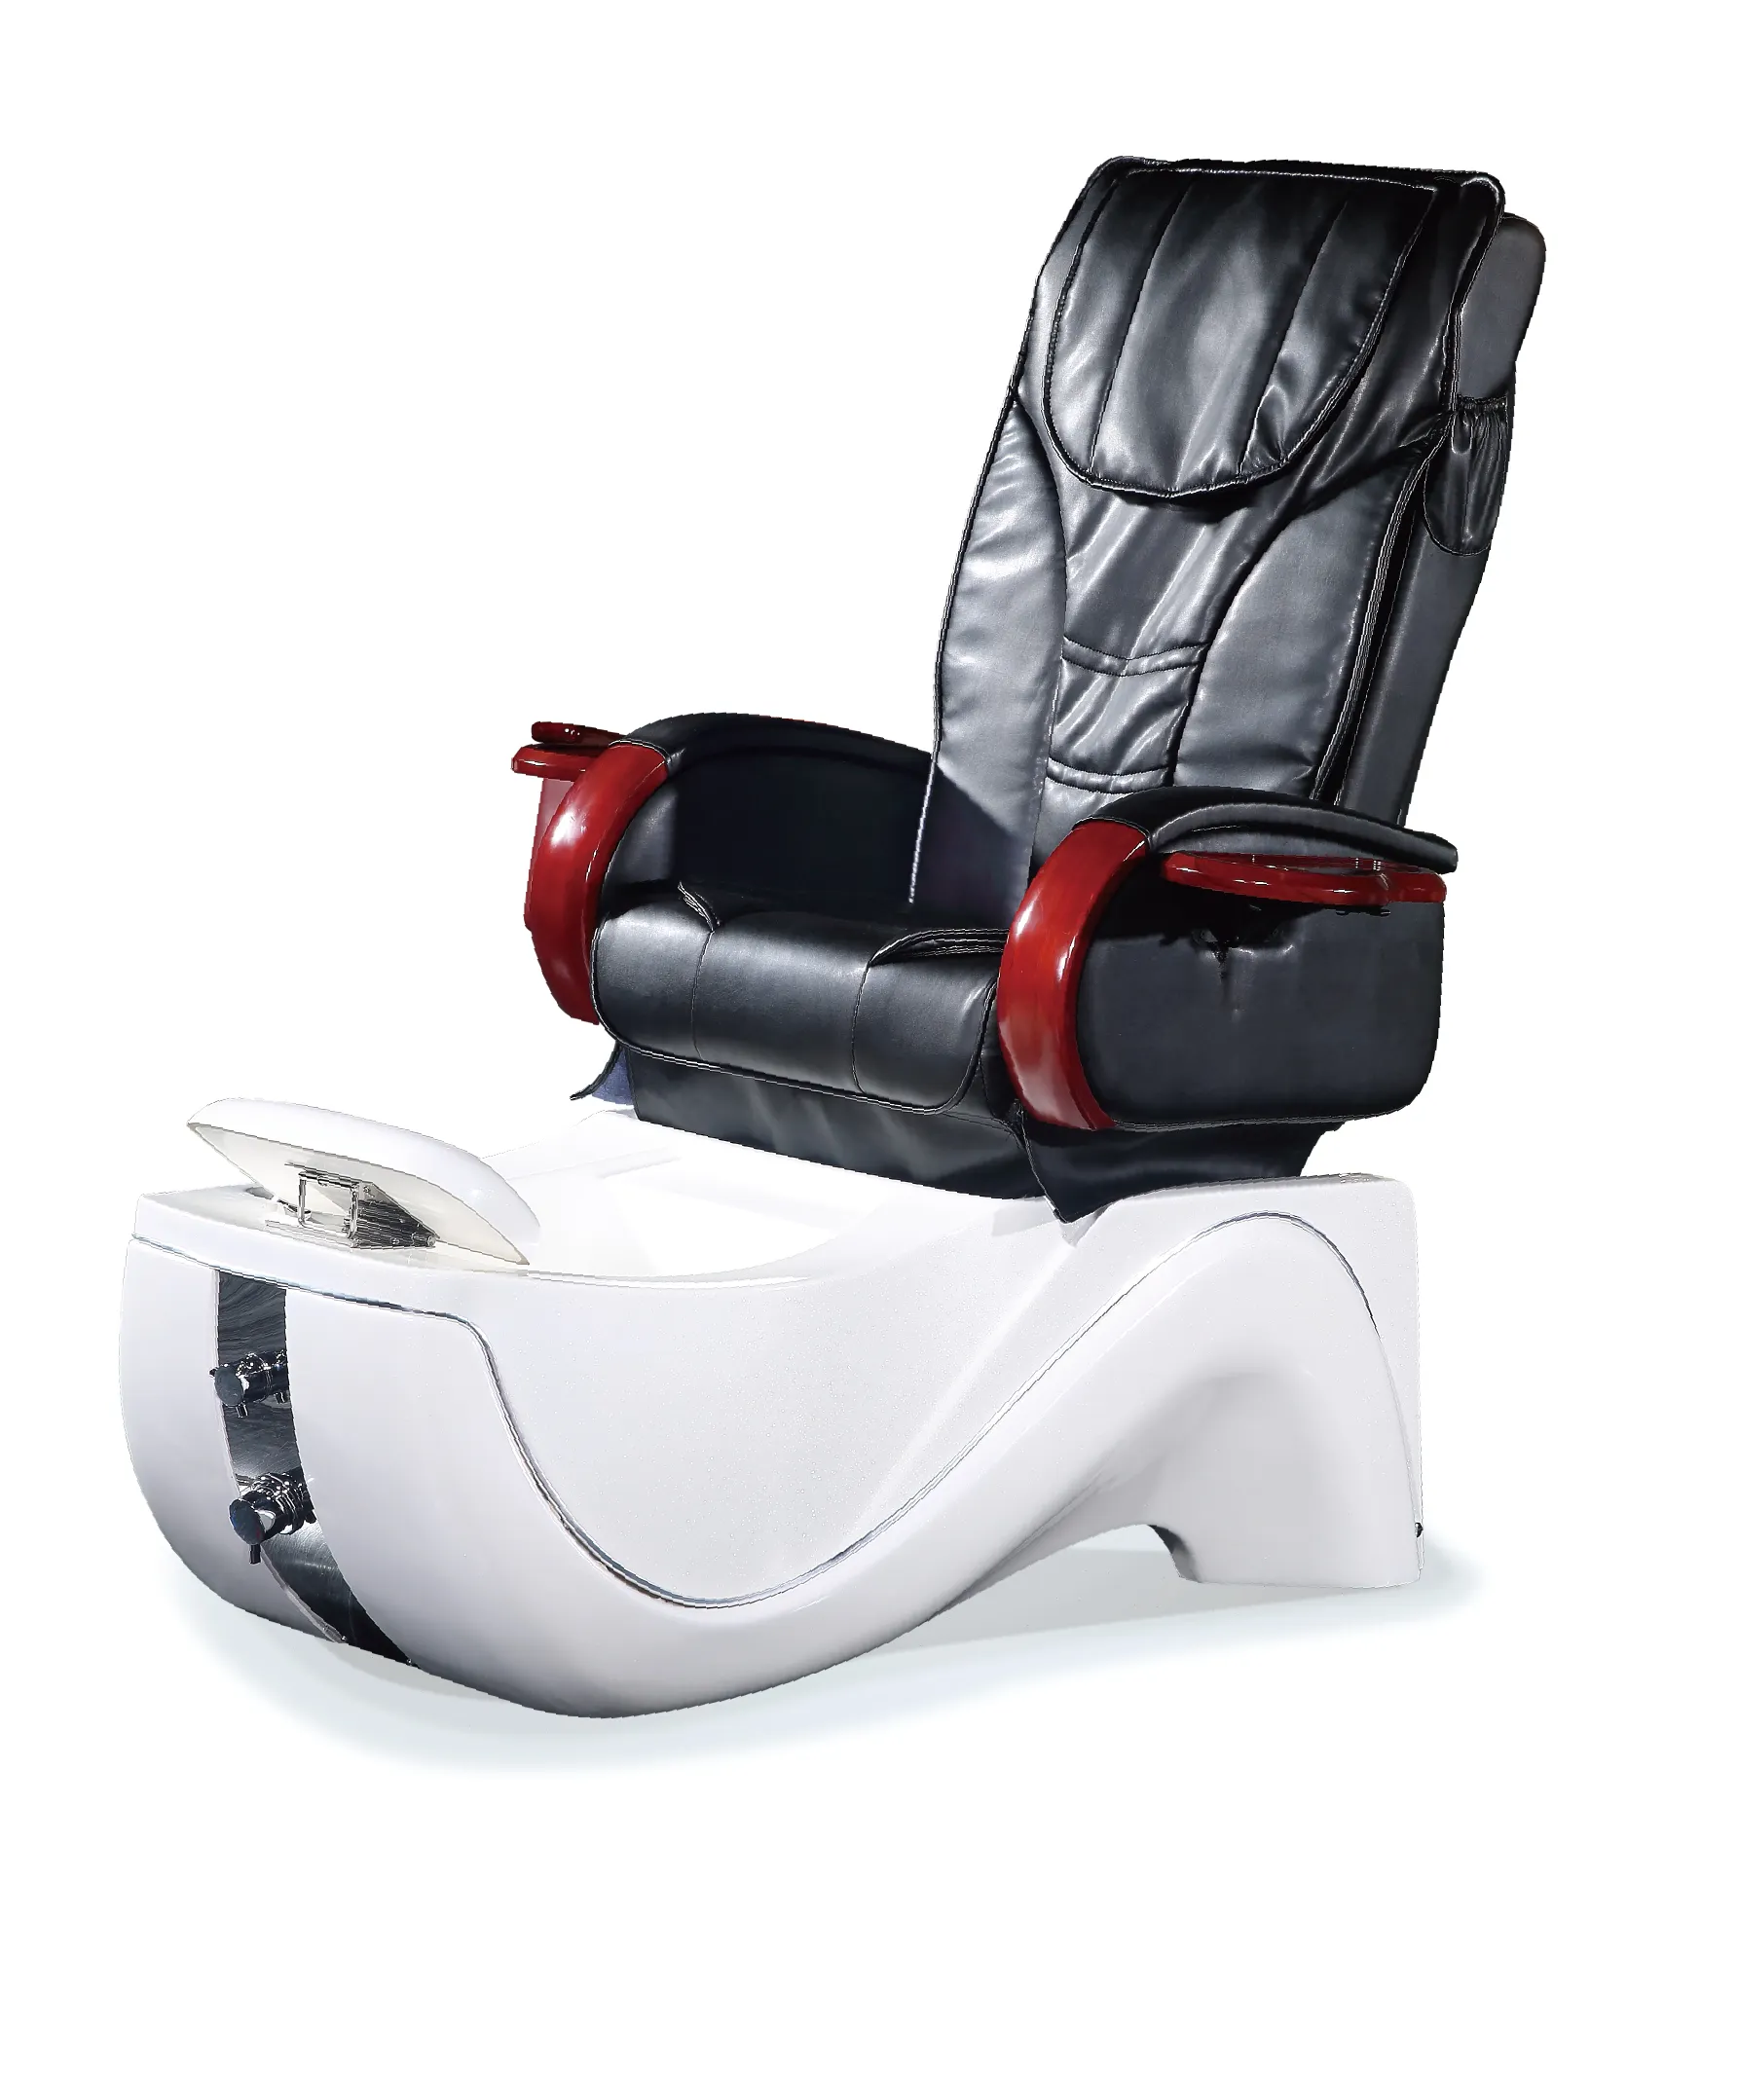 Luxury Electric No Plumbing Reclining Massage Pedicure Chair Footrest Pedicure Chair Nail Salon Foot Spa Manicure